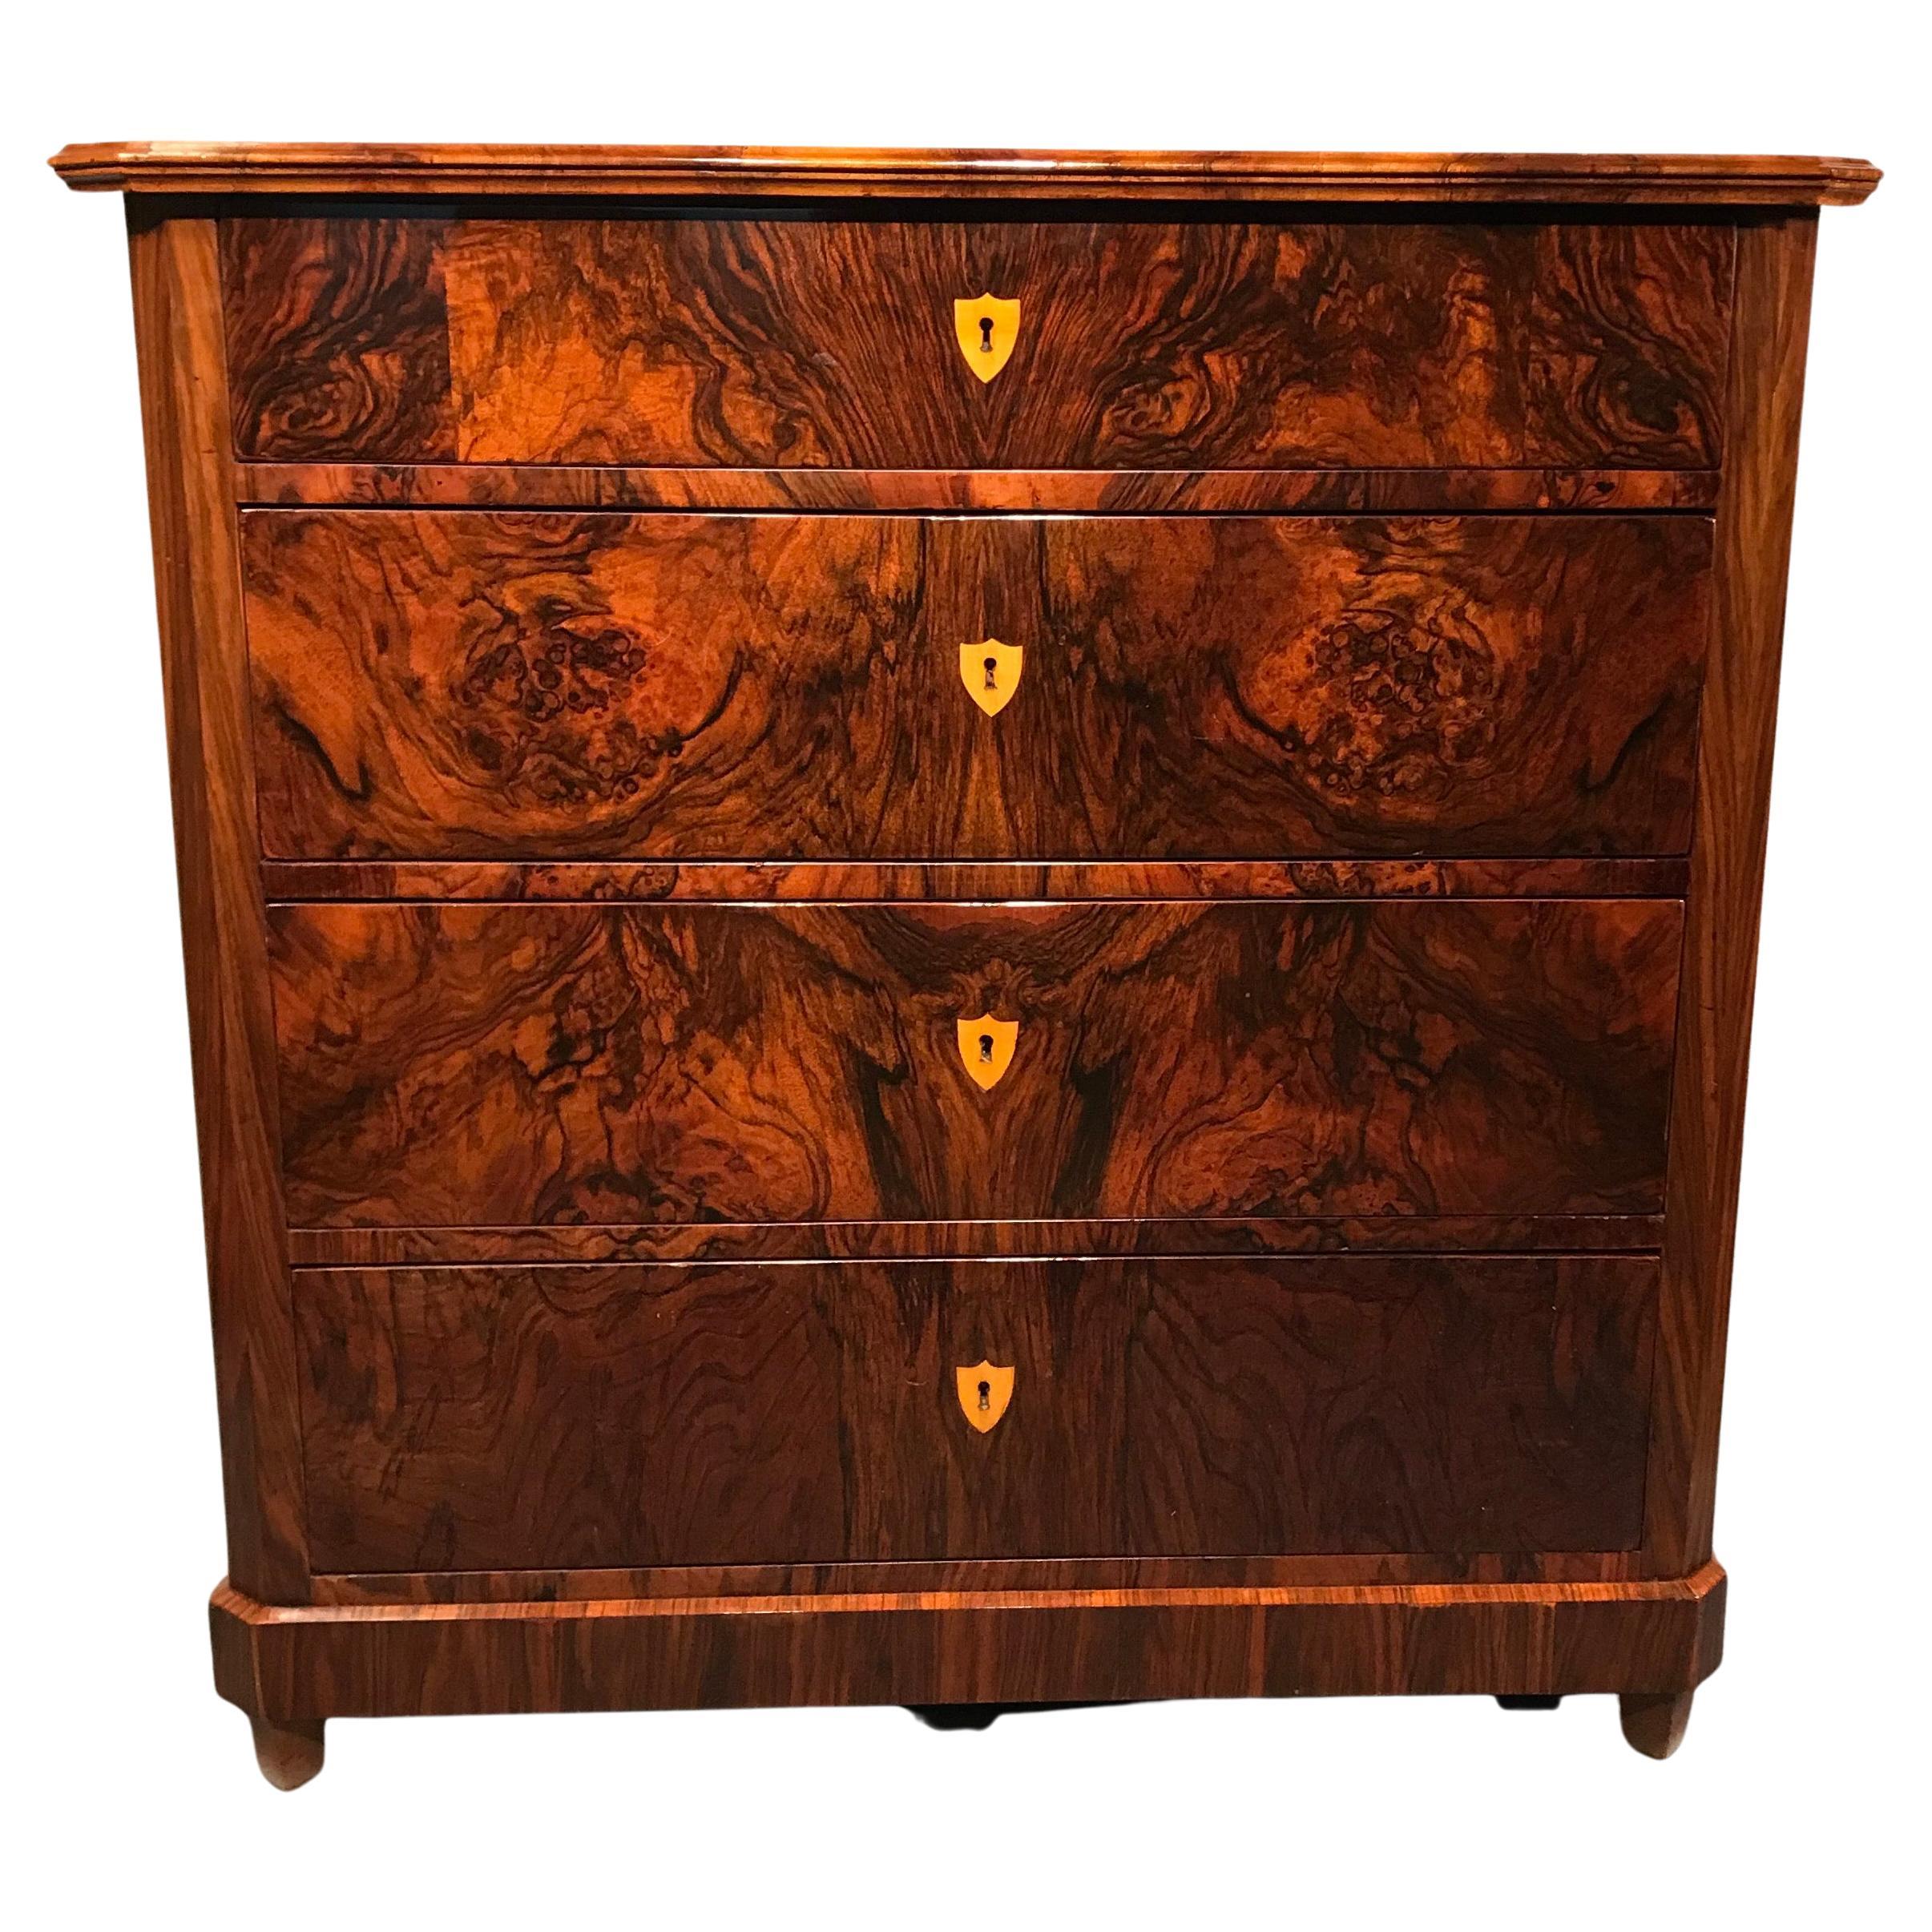 This unique Biedermeier Dresser of the 1820's was made in Southern Germany. The four drawers commode has a very pretty walnut veneer on a pinewood body. The escutcheons are made of bone inlays. The commode has been professionally refinished with a